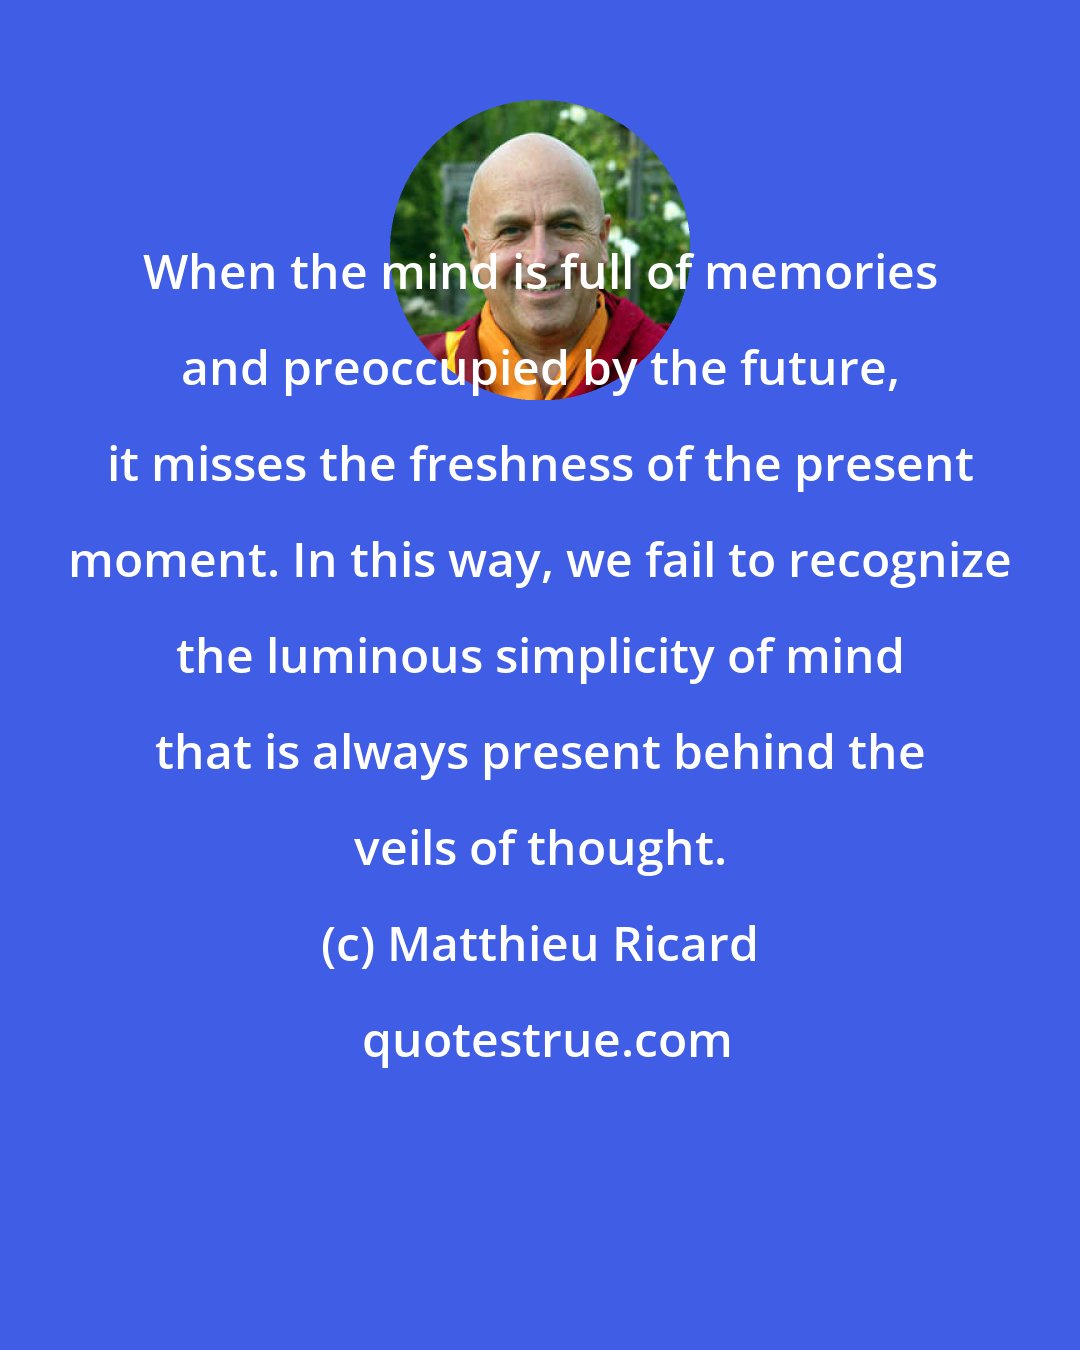 Matthieu Ricard: When the mind is full of memories and preoccupied by the future, it misses the freshness of the present moment. In this way, we fail to recognize the luminous simplicity of mind that is always present behind the veils of thought.